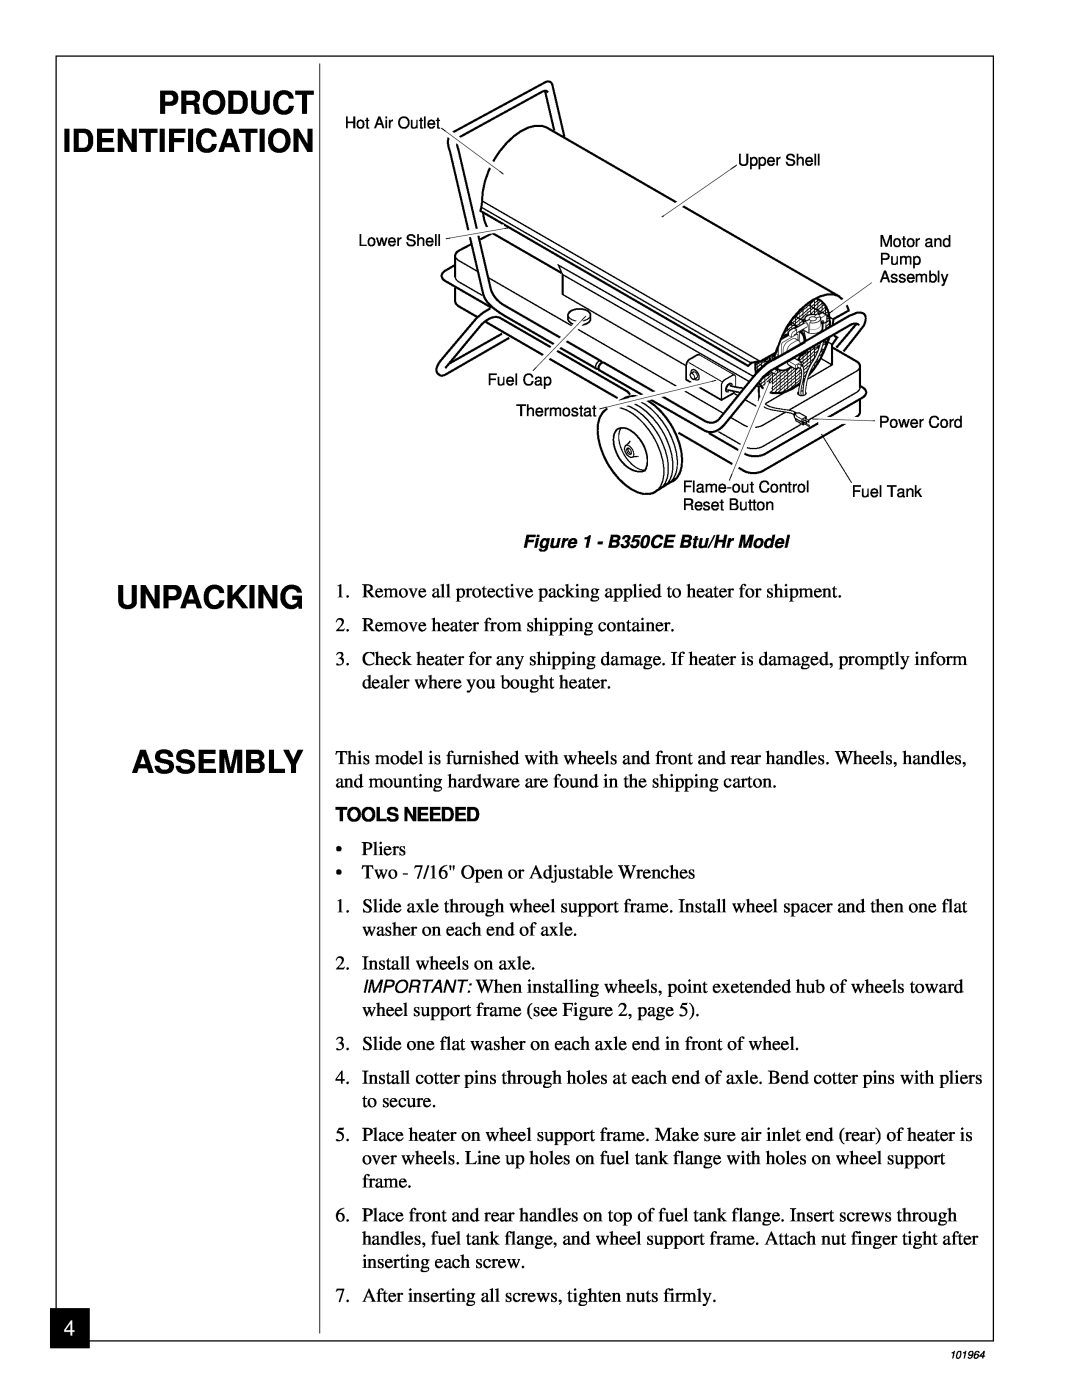 Desa B350CE owner manual Unpacking Assembly, Product Identification, Tools Needed 